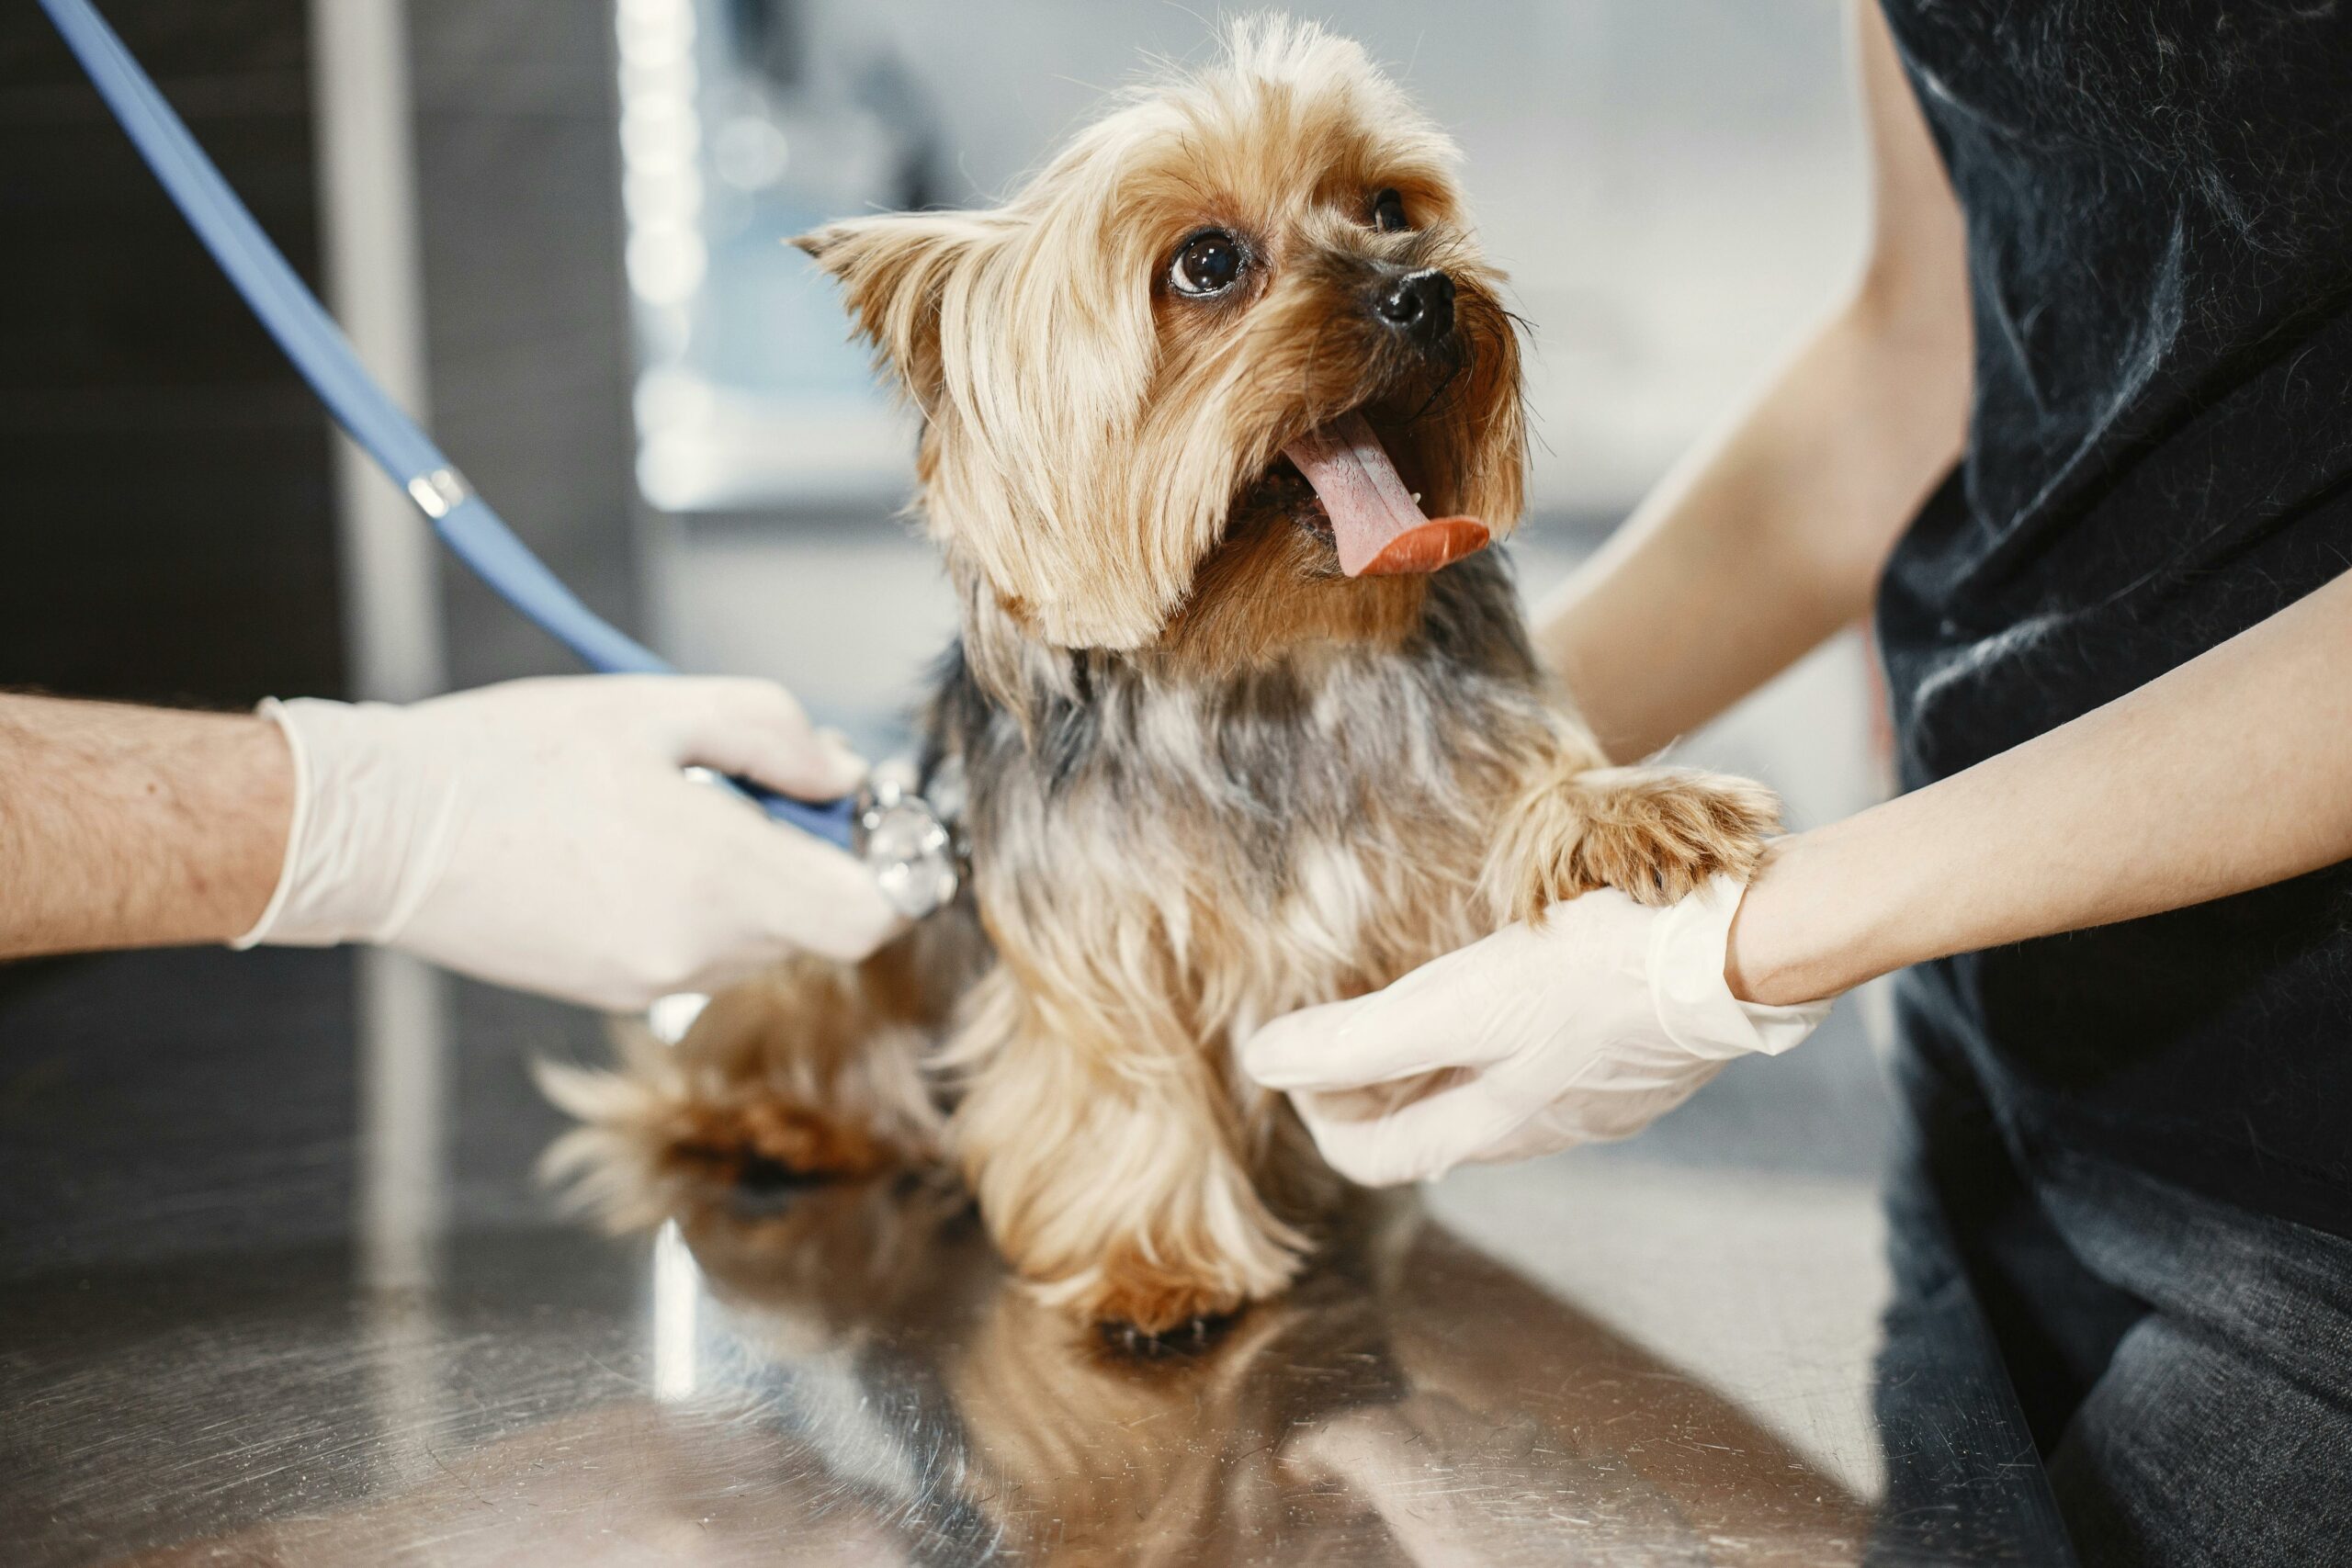 A small Yorkshire Terrier has its heart listened to at a Tyler, TX vet clinic